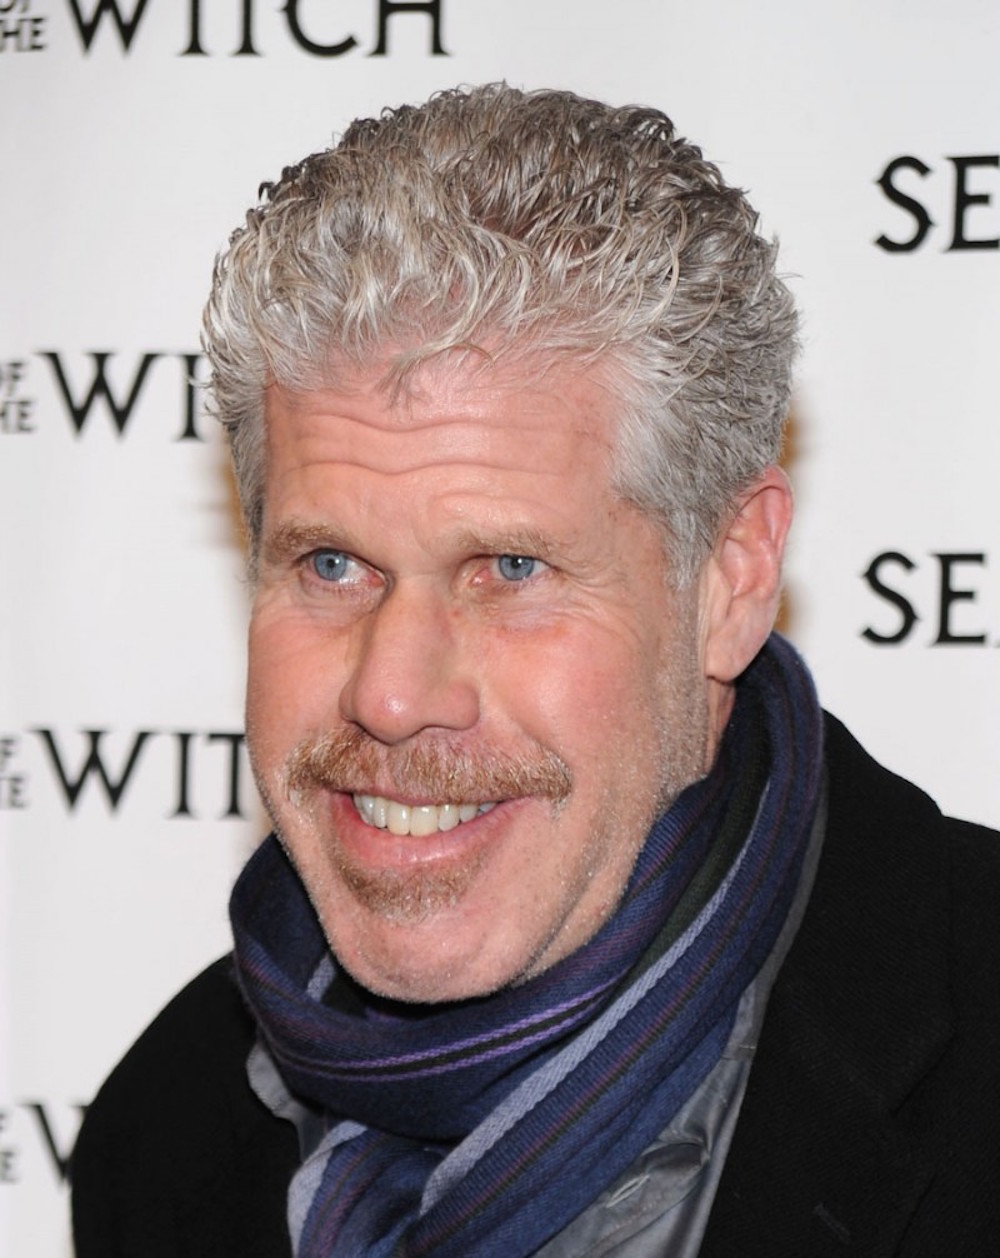 12. Ron Perlman - He voiced Scorpion in Mortal Kombat - Defenders of the Realm